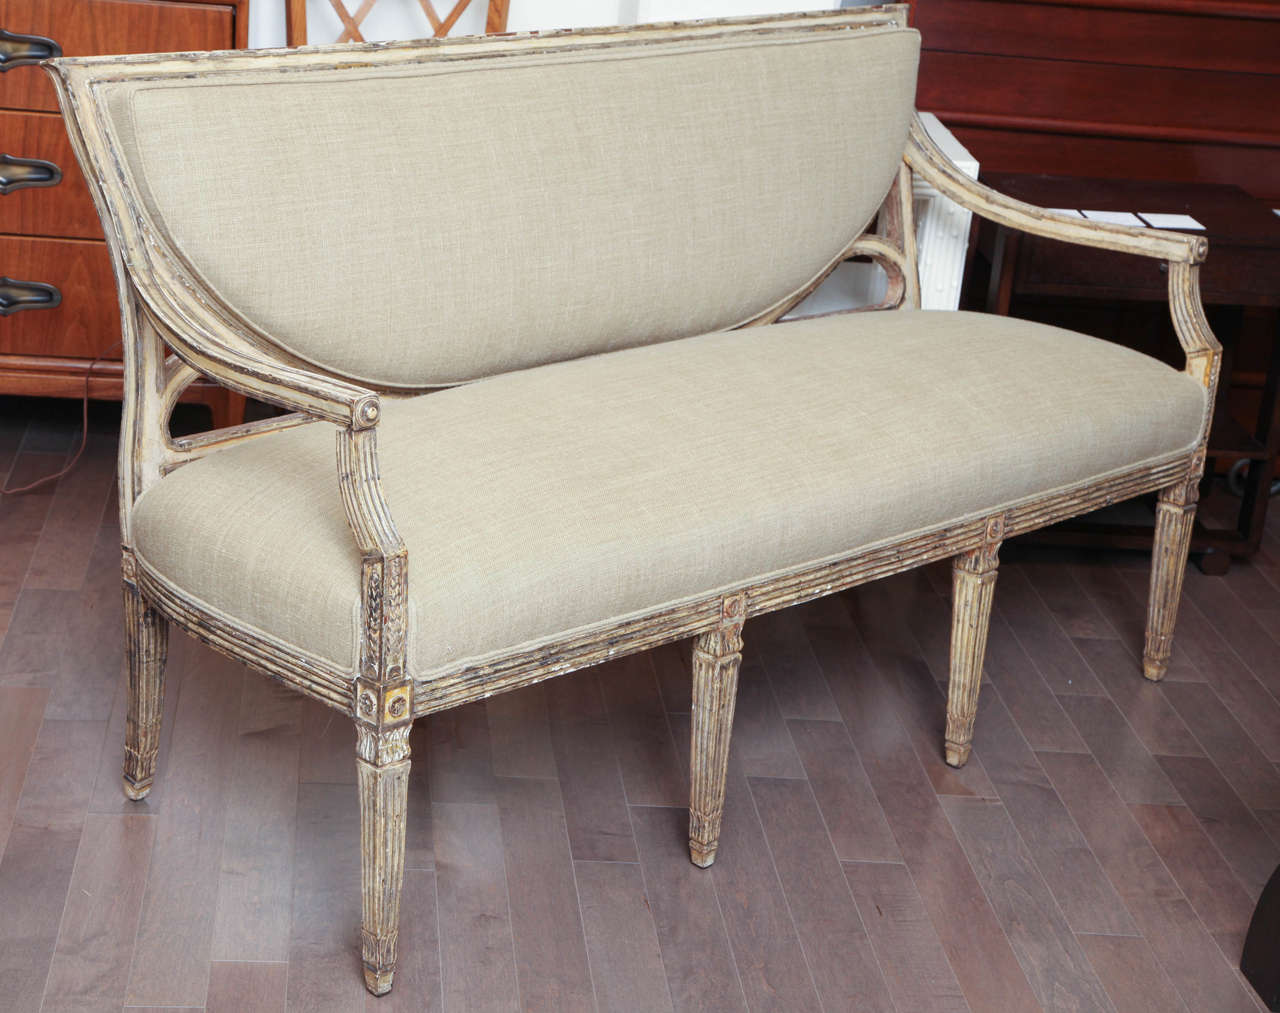 Carved 19th century continental settee with original painted finish and new linen upholstery